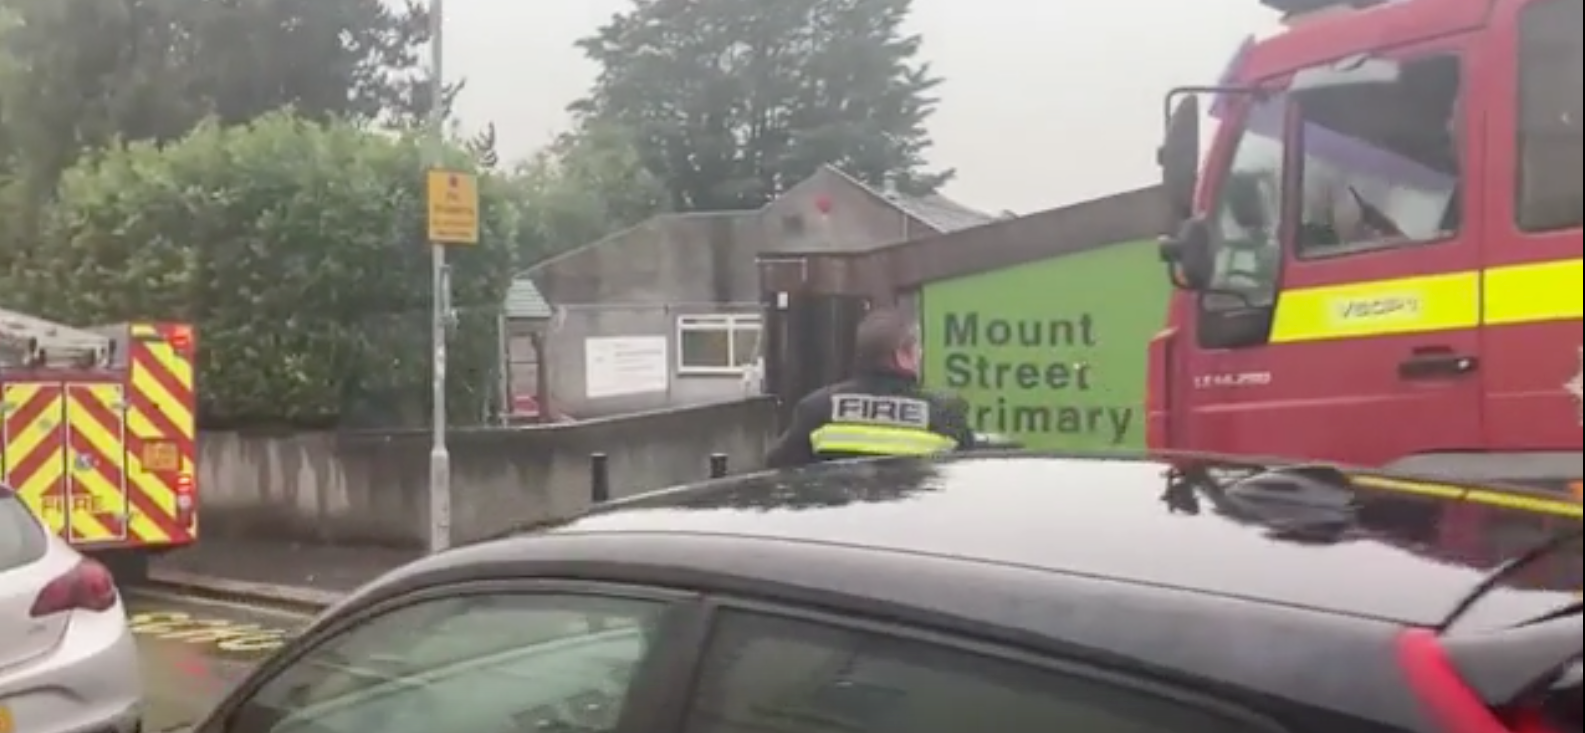 Devon and Somerset Fire and Rescue Service attends Mount Street Primary School in Plymouth after a lightning strike